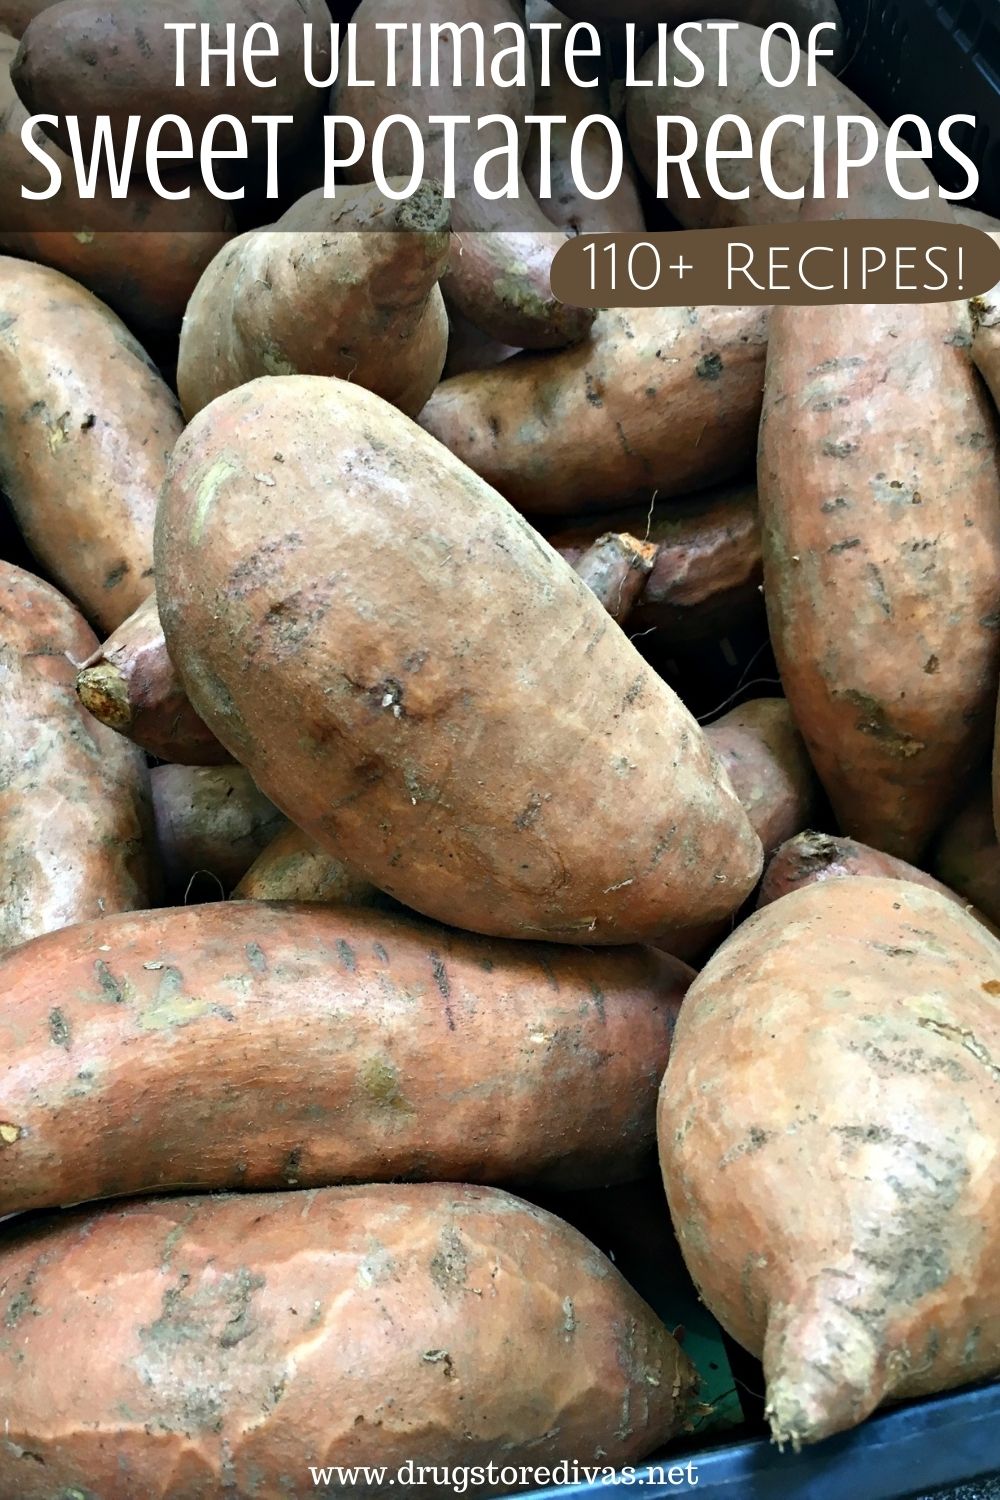 Switch up your menu with these Sweet Potato Recipes from www.drugstoredivas.net. There are over 110 to choose from.